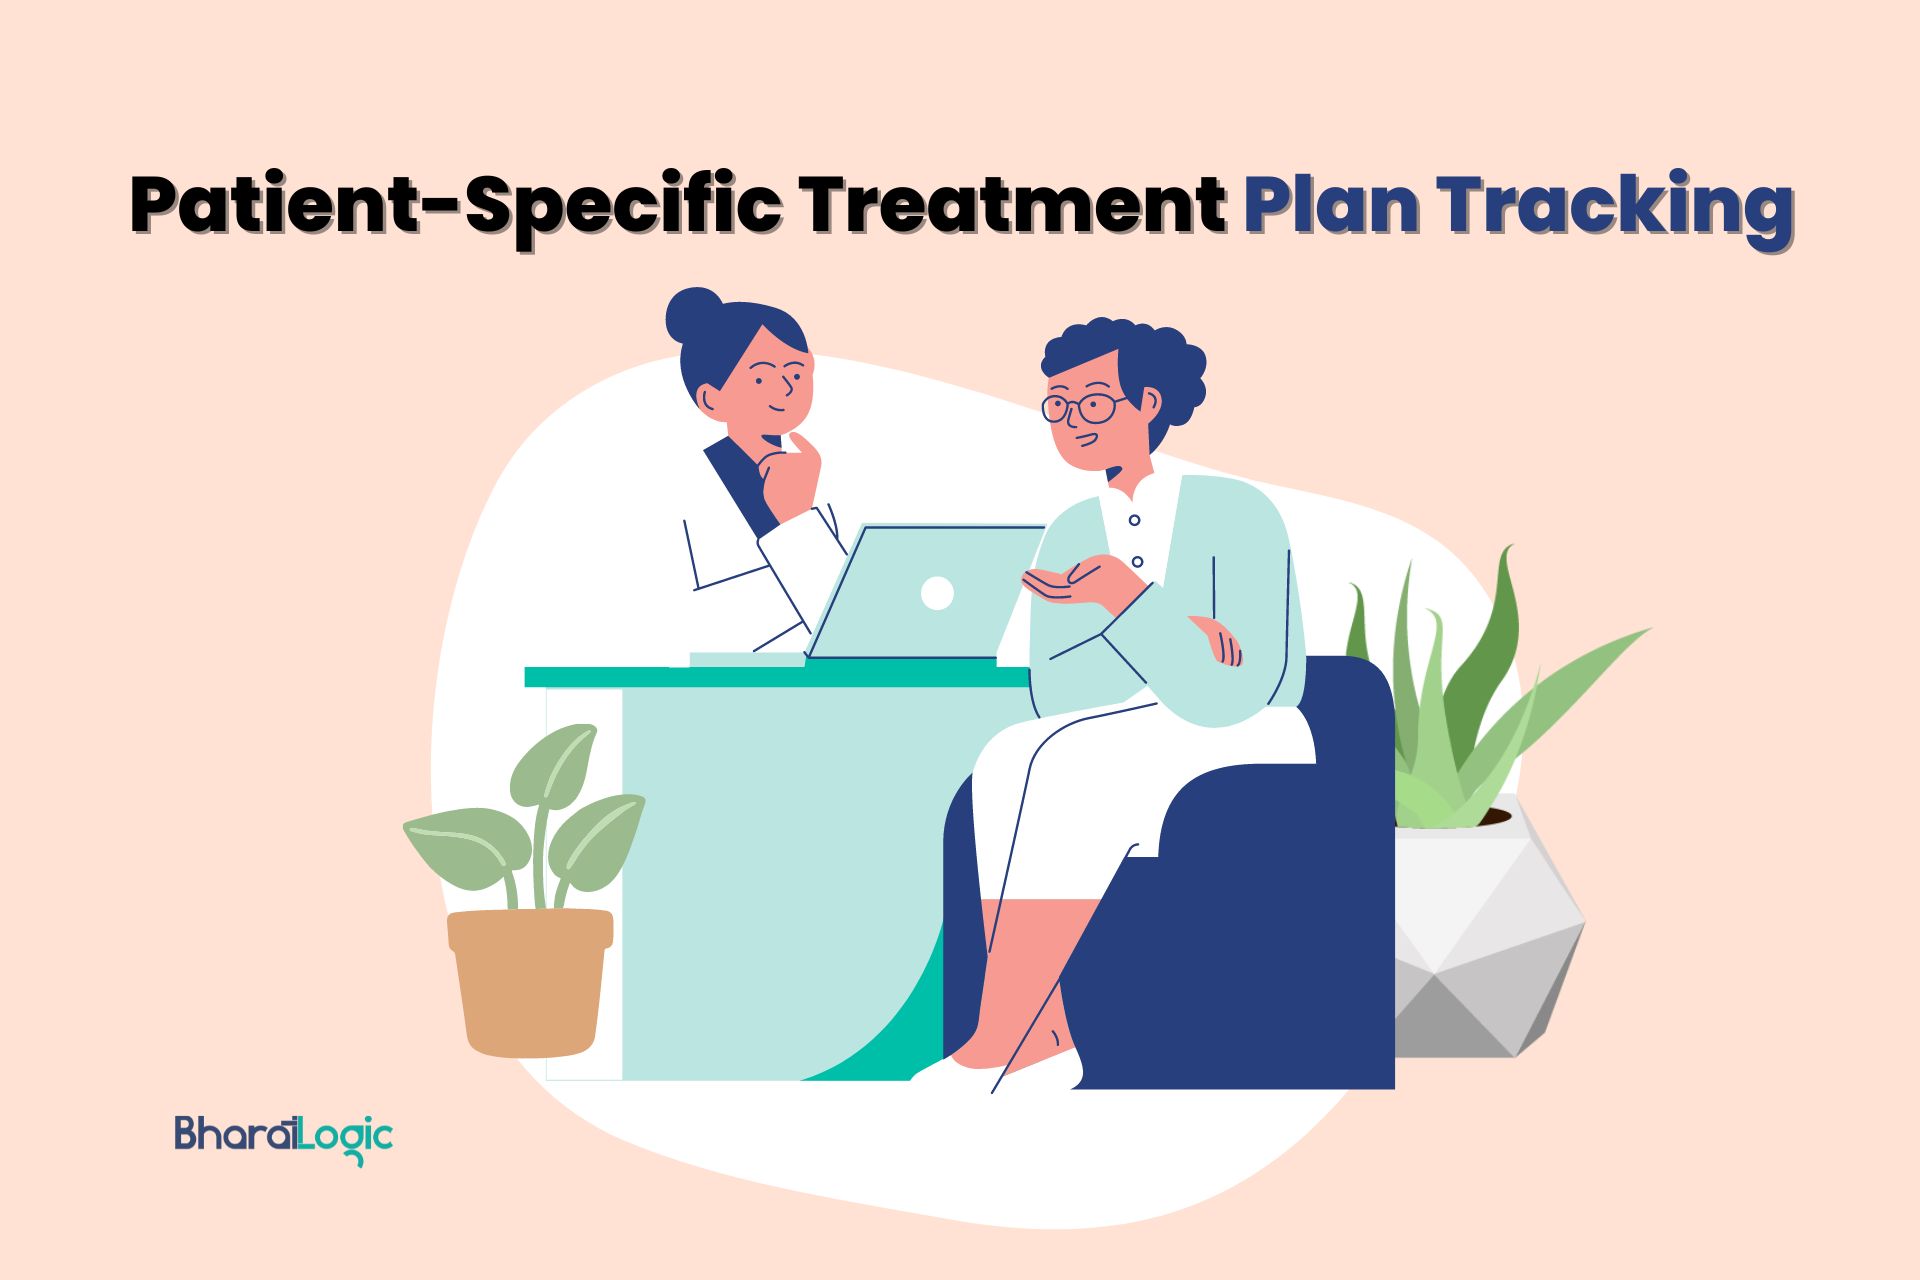 Patient-Specific Treatment Plan Tracking